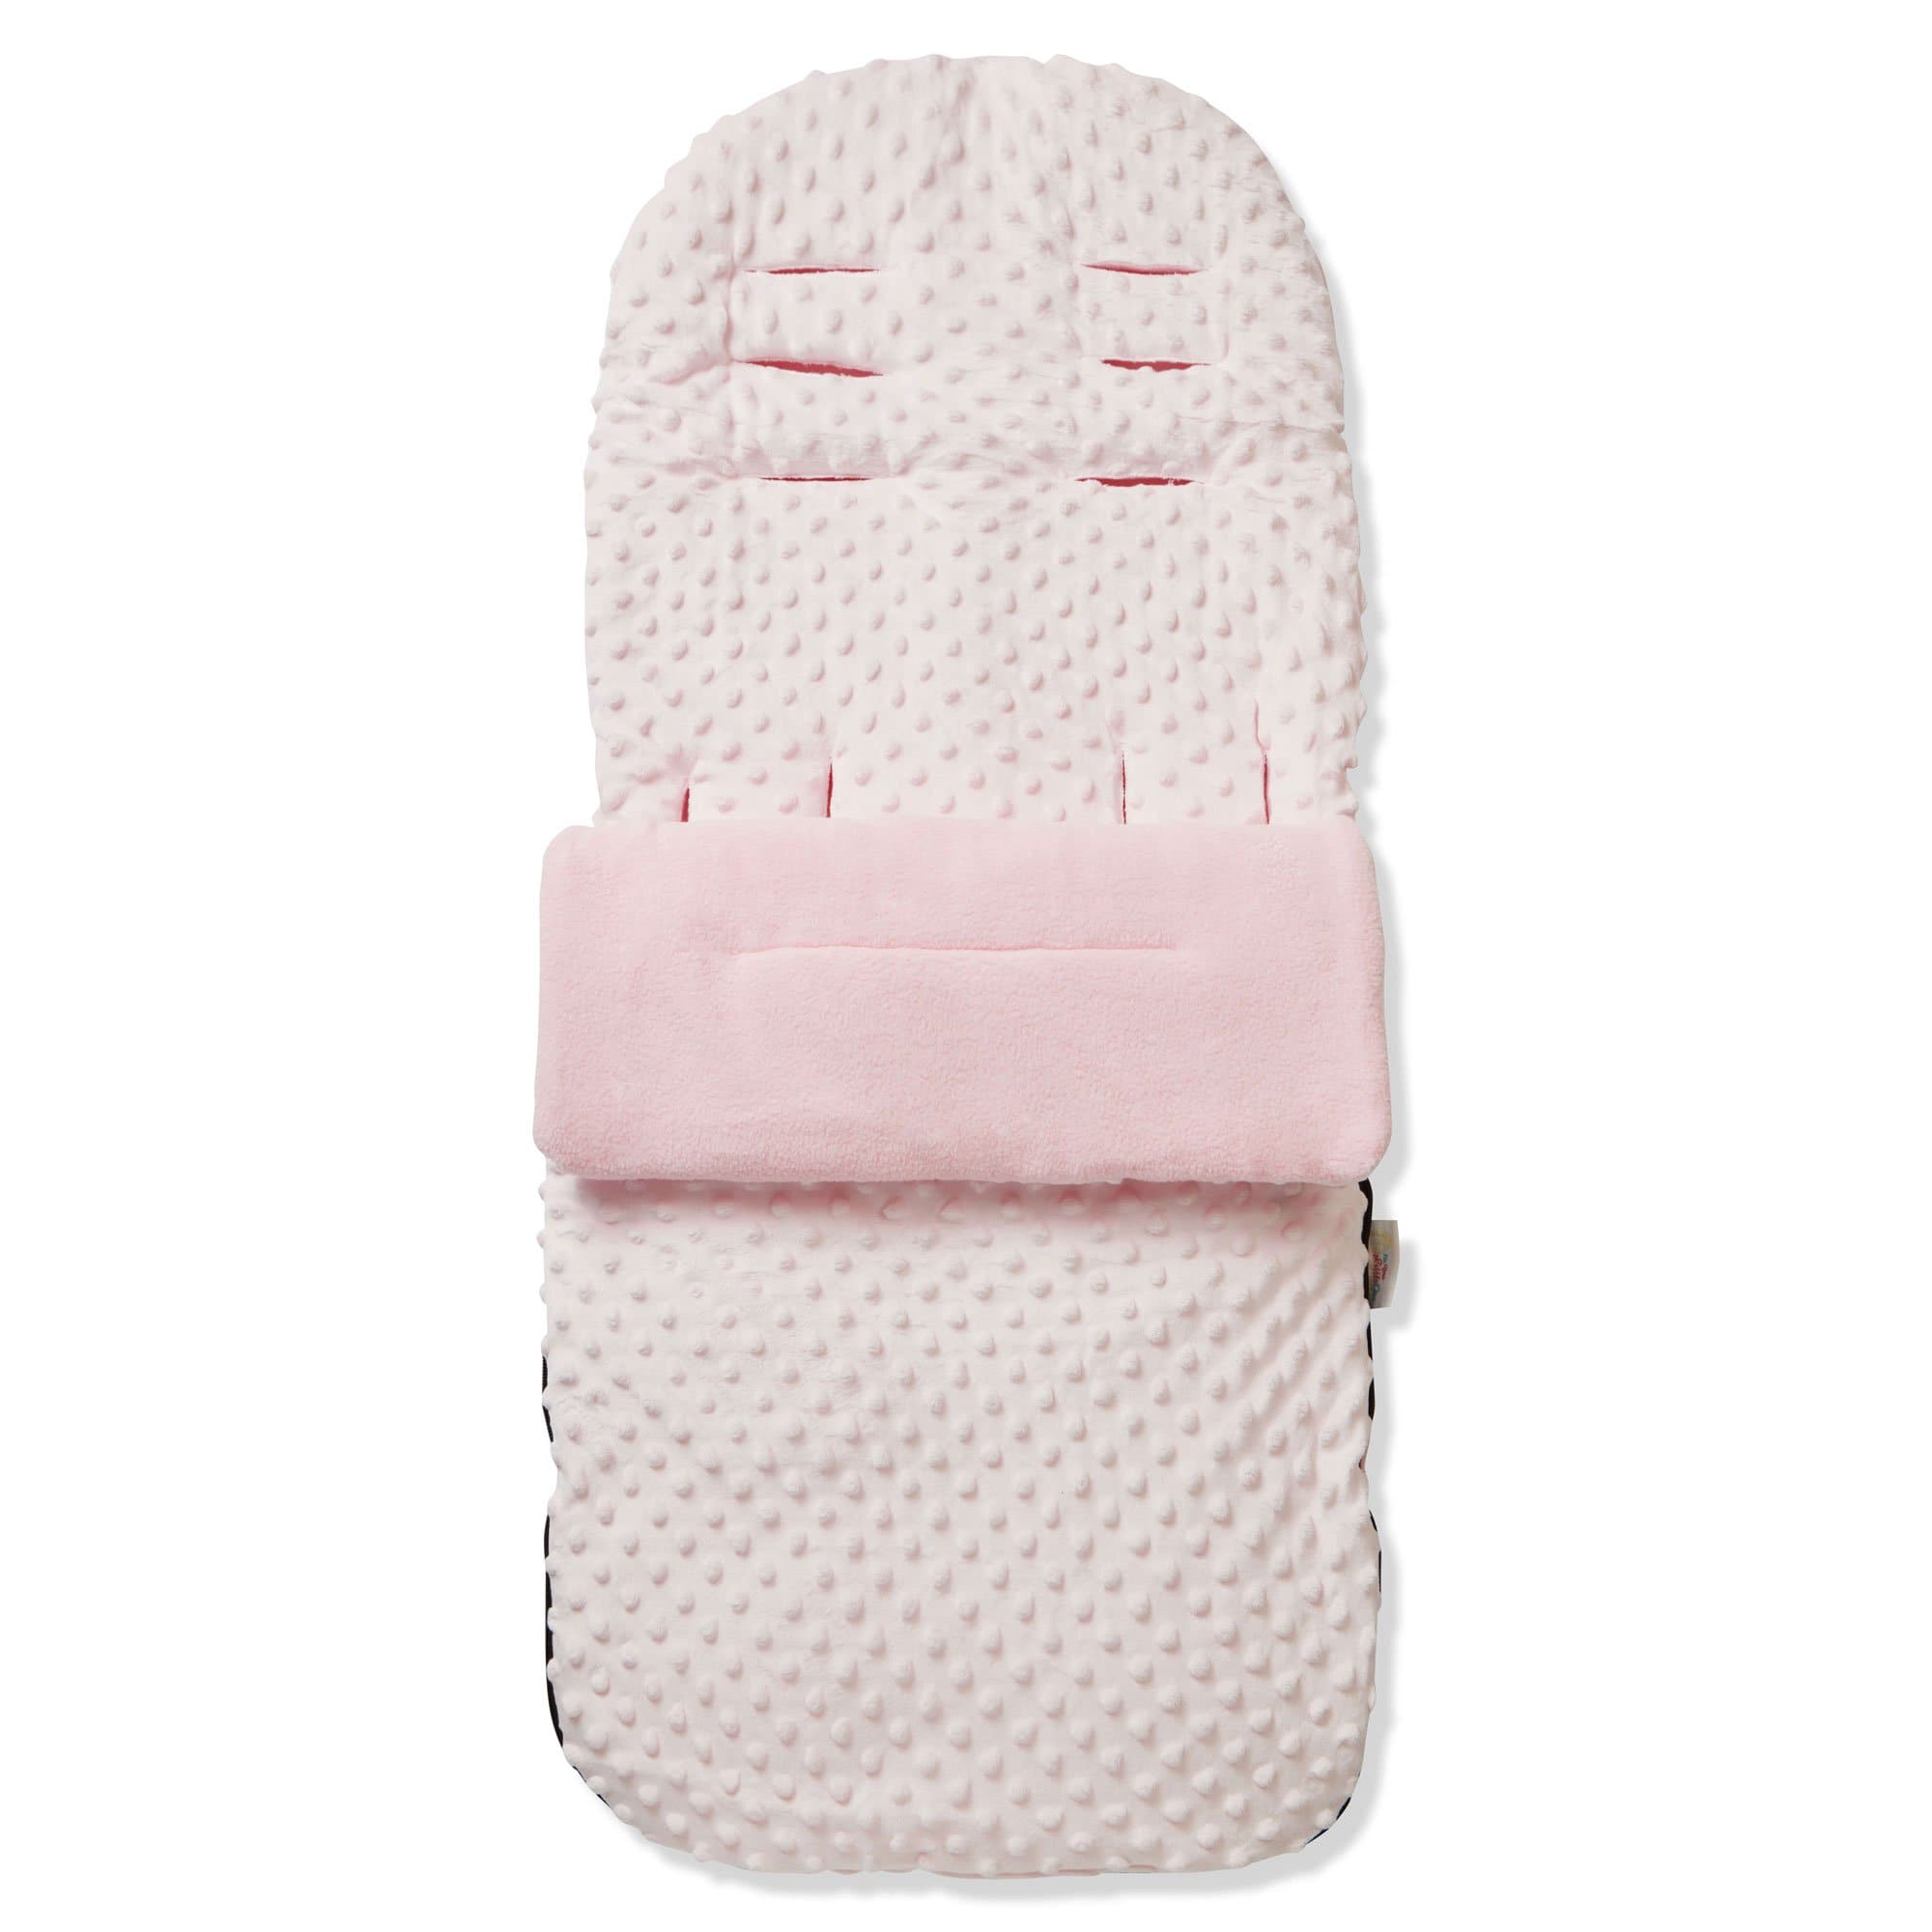 Dimple Footmuff / Cosy Toes Compatible with My Babiie - Pink / Fits All Models | For Your Little One